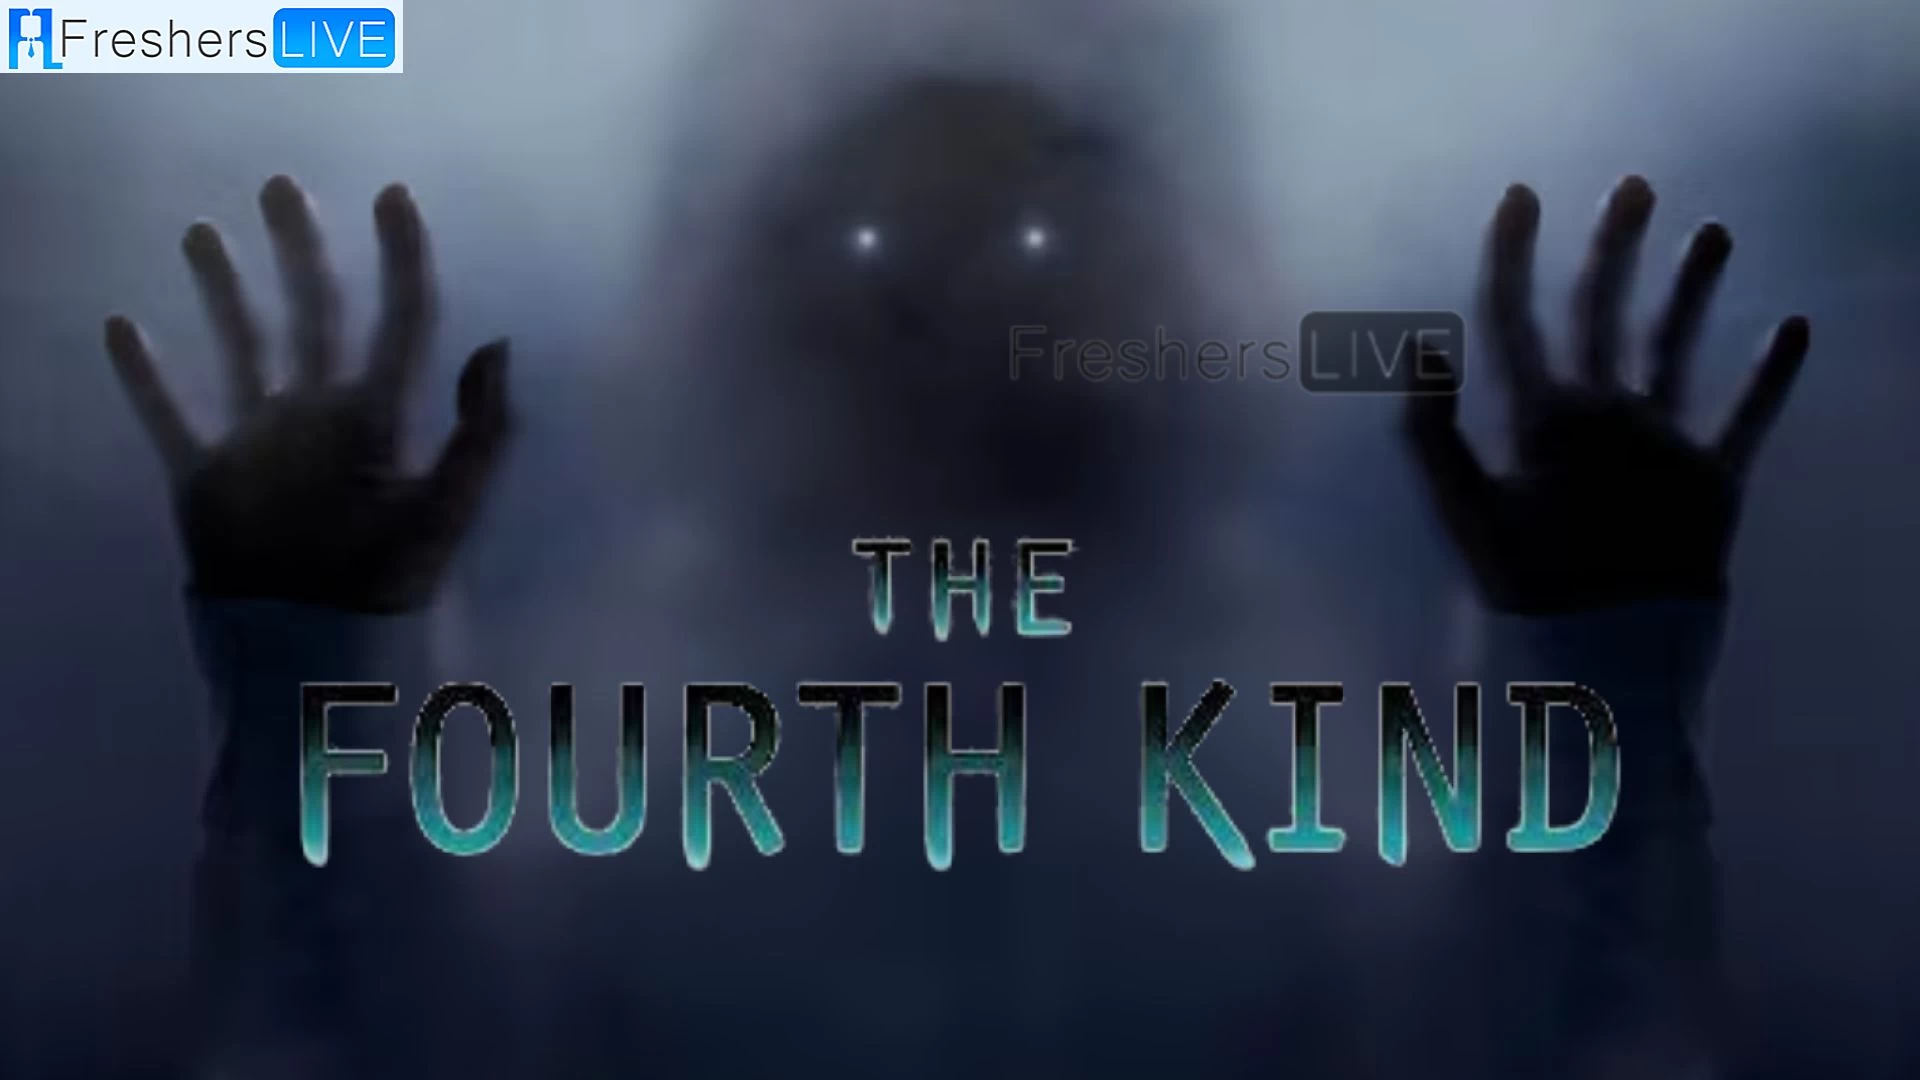 Is The Fourth Kind Based On a True Story? The Fourth Kind Movie Plot, Cast and More